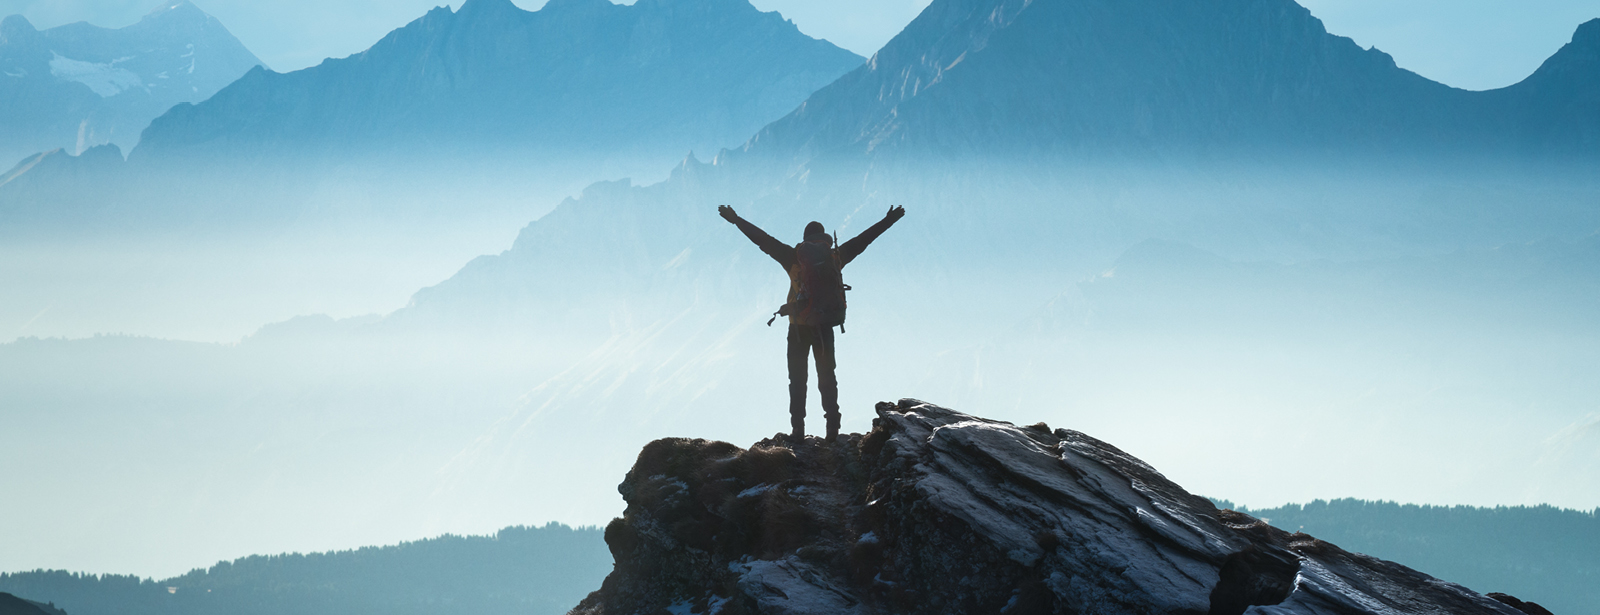 Positive man celebrating success stock photo Mountain, Mountain Peak, On Top Of, Conquering Adversity, People